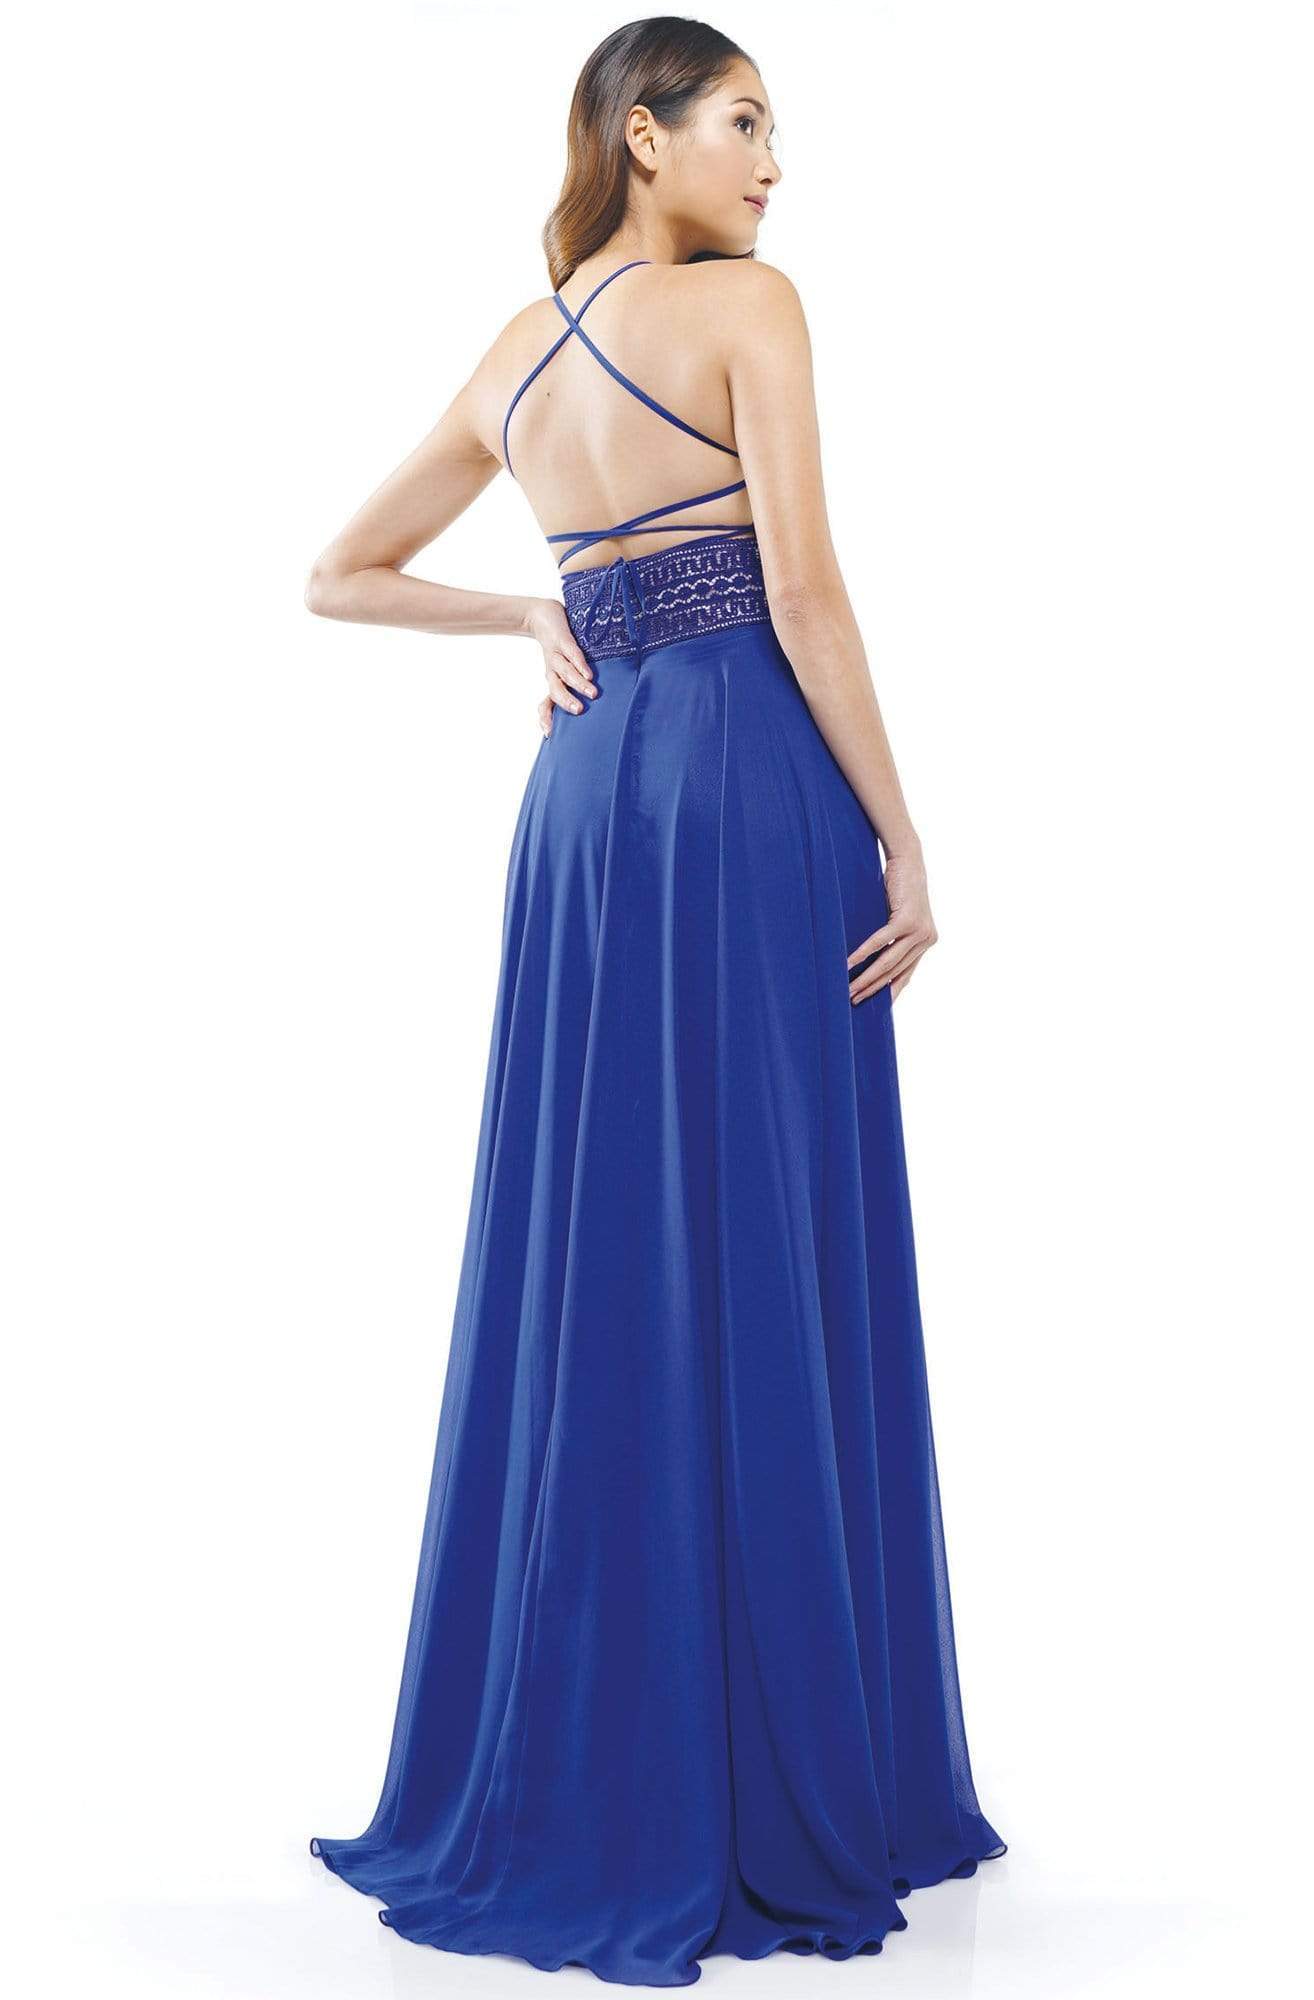 Glow Dress - G889 Strappy Sleeveless Lace Top Chiffon A-Line Gown Prom Dresses